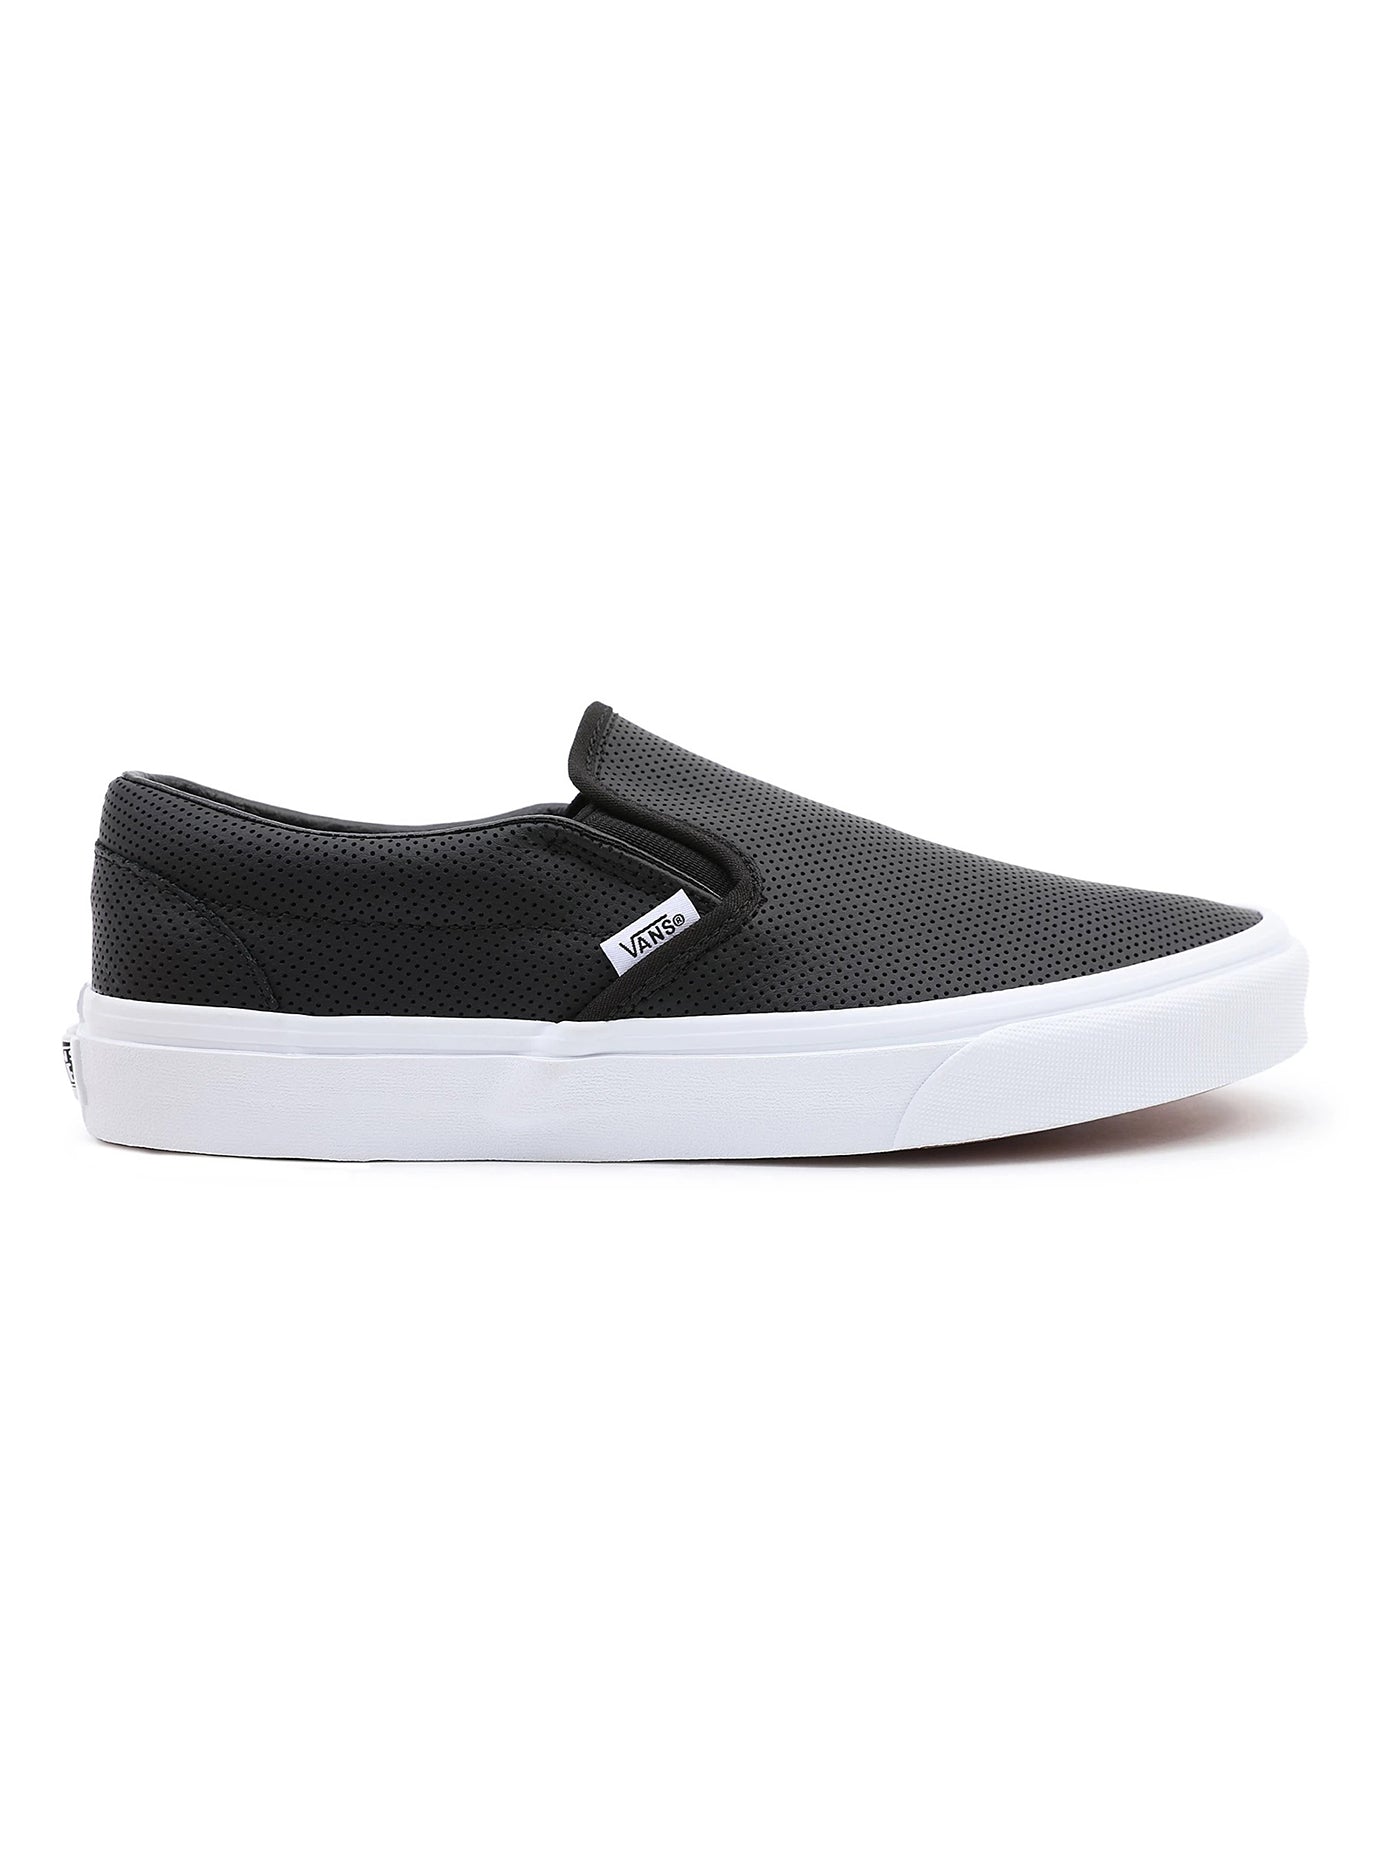 Vans Perf Leather Slip On Shoes